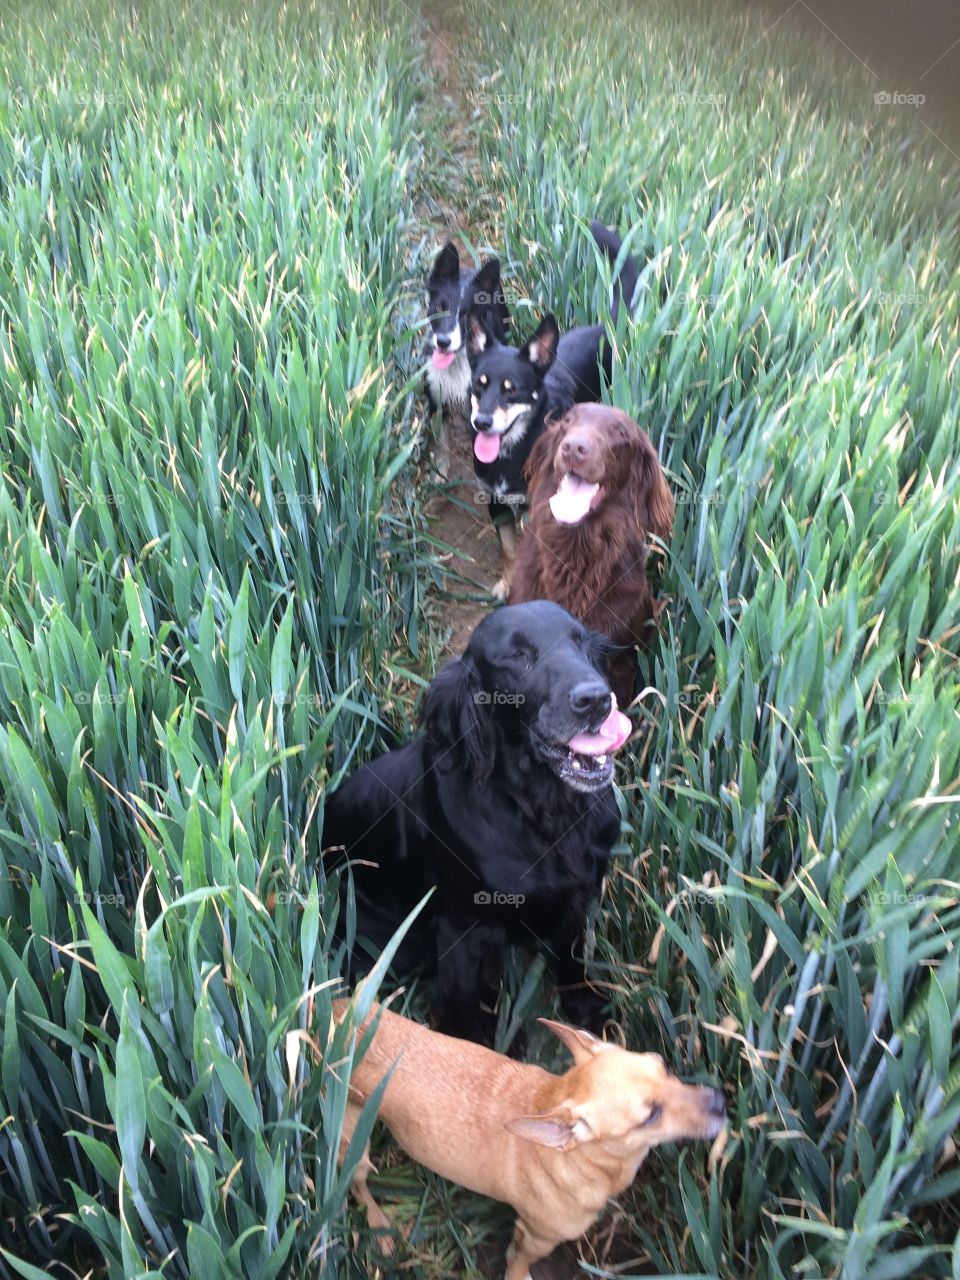 Dogs lined up in a tractor tread. Wheat either side